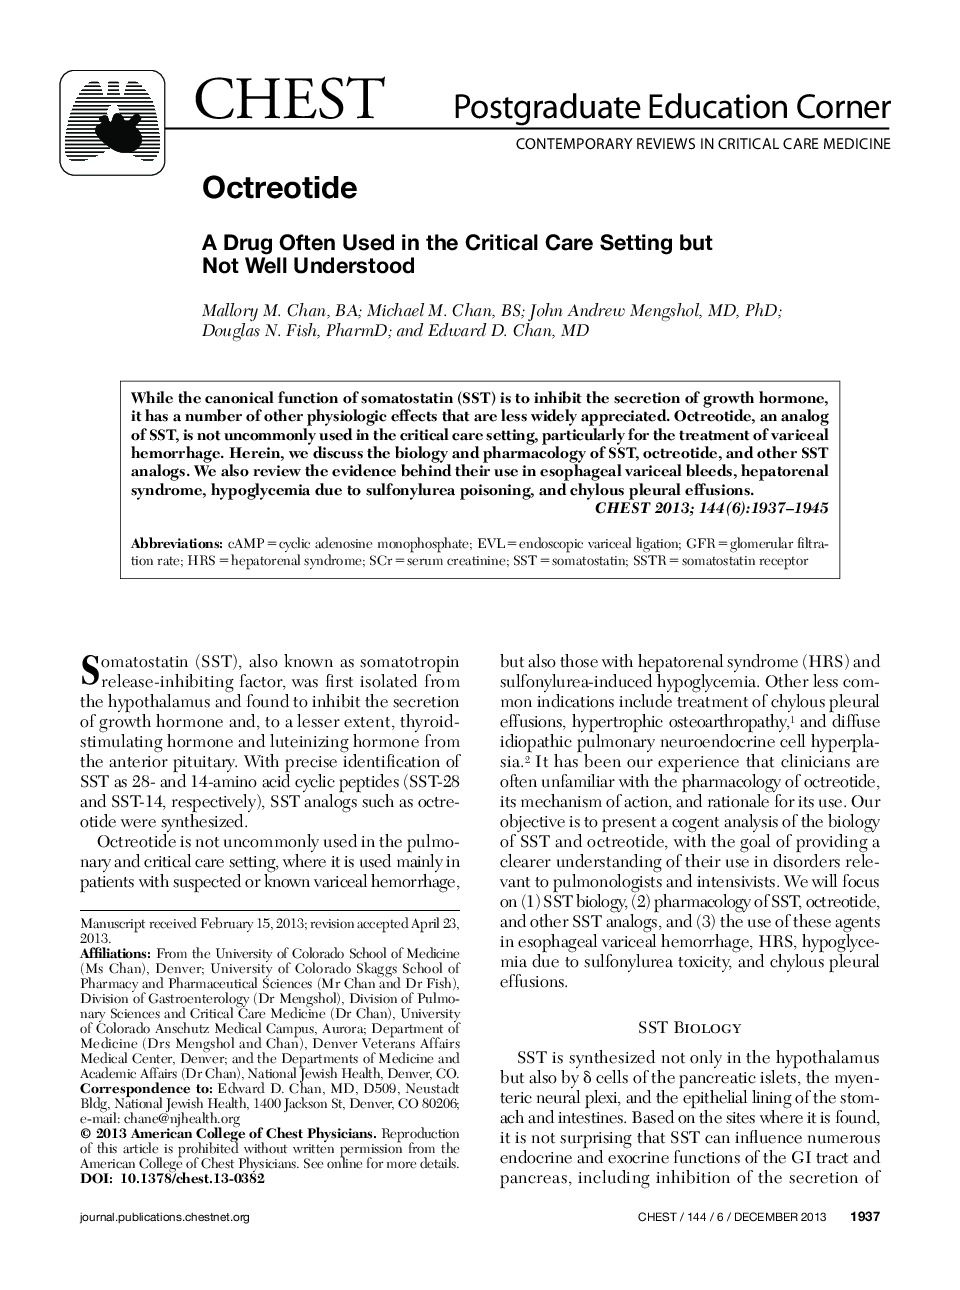 Octreotide : A Drug Often Used in the Critical Care Setting but Not Well Understood